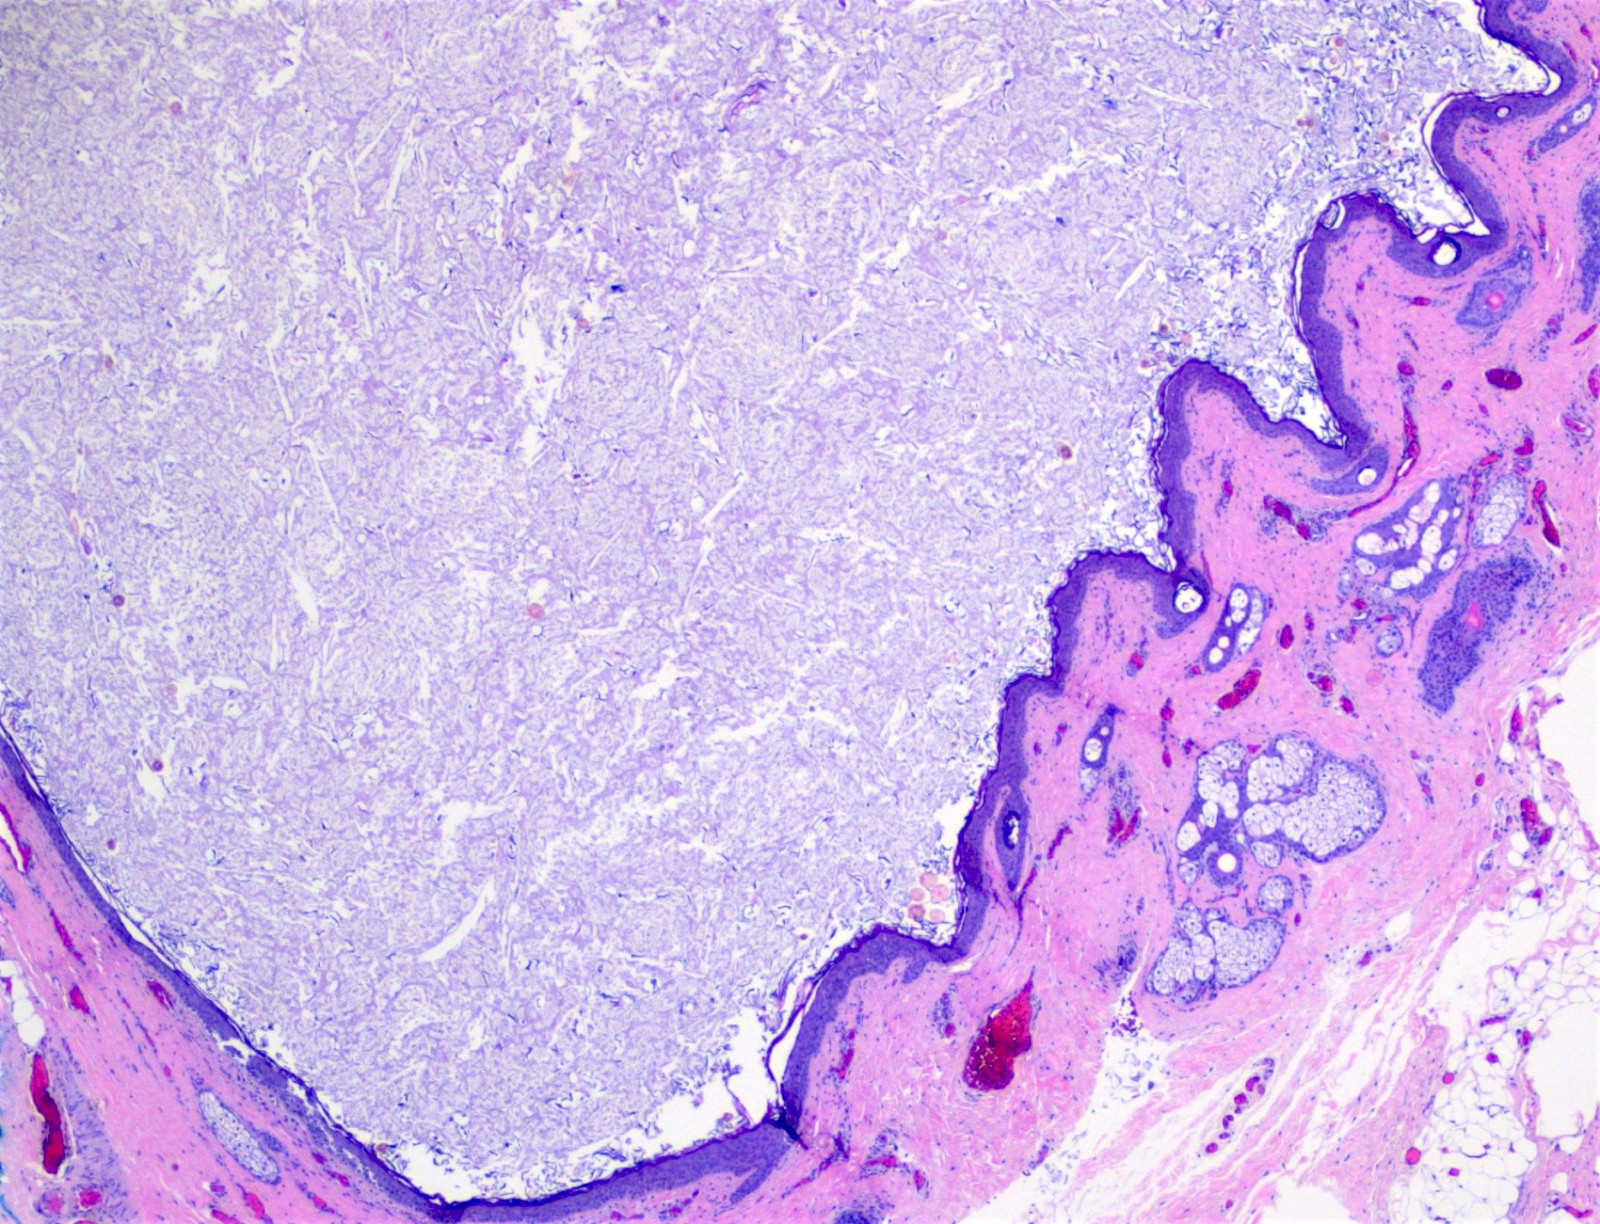 Dermoid cyst, keratinaceous contents